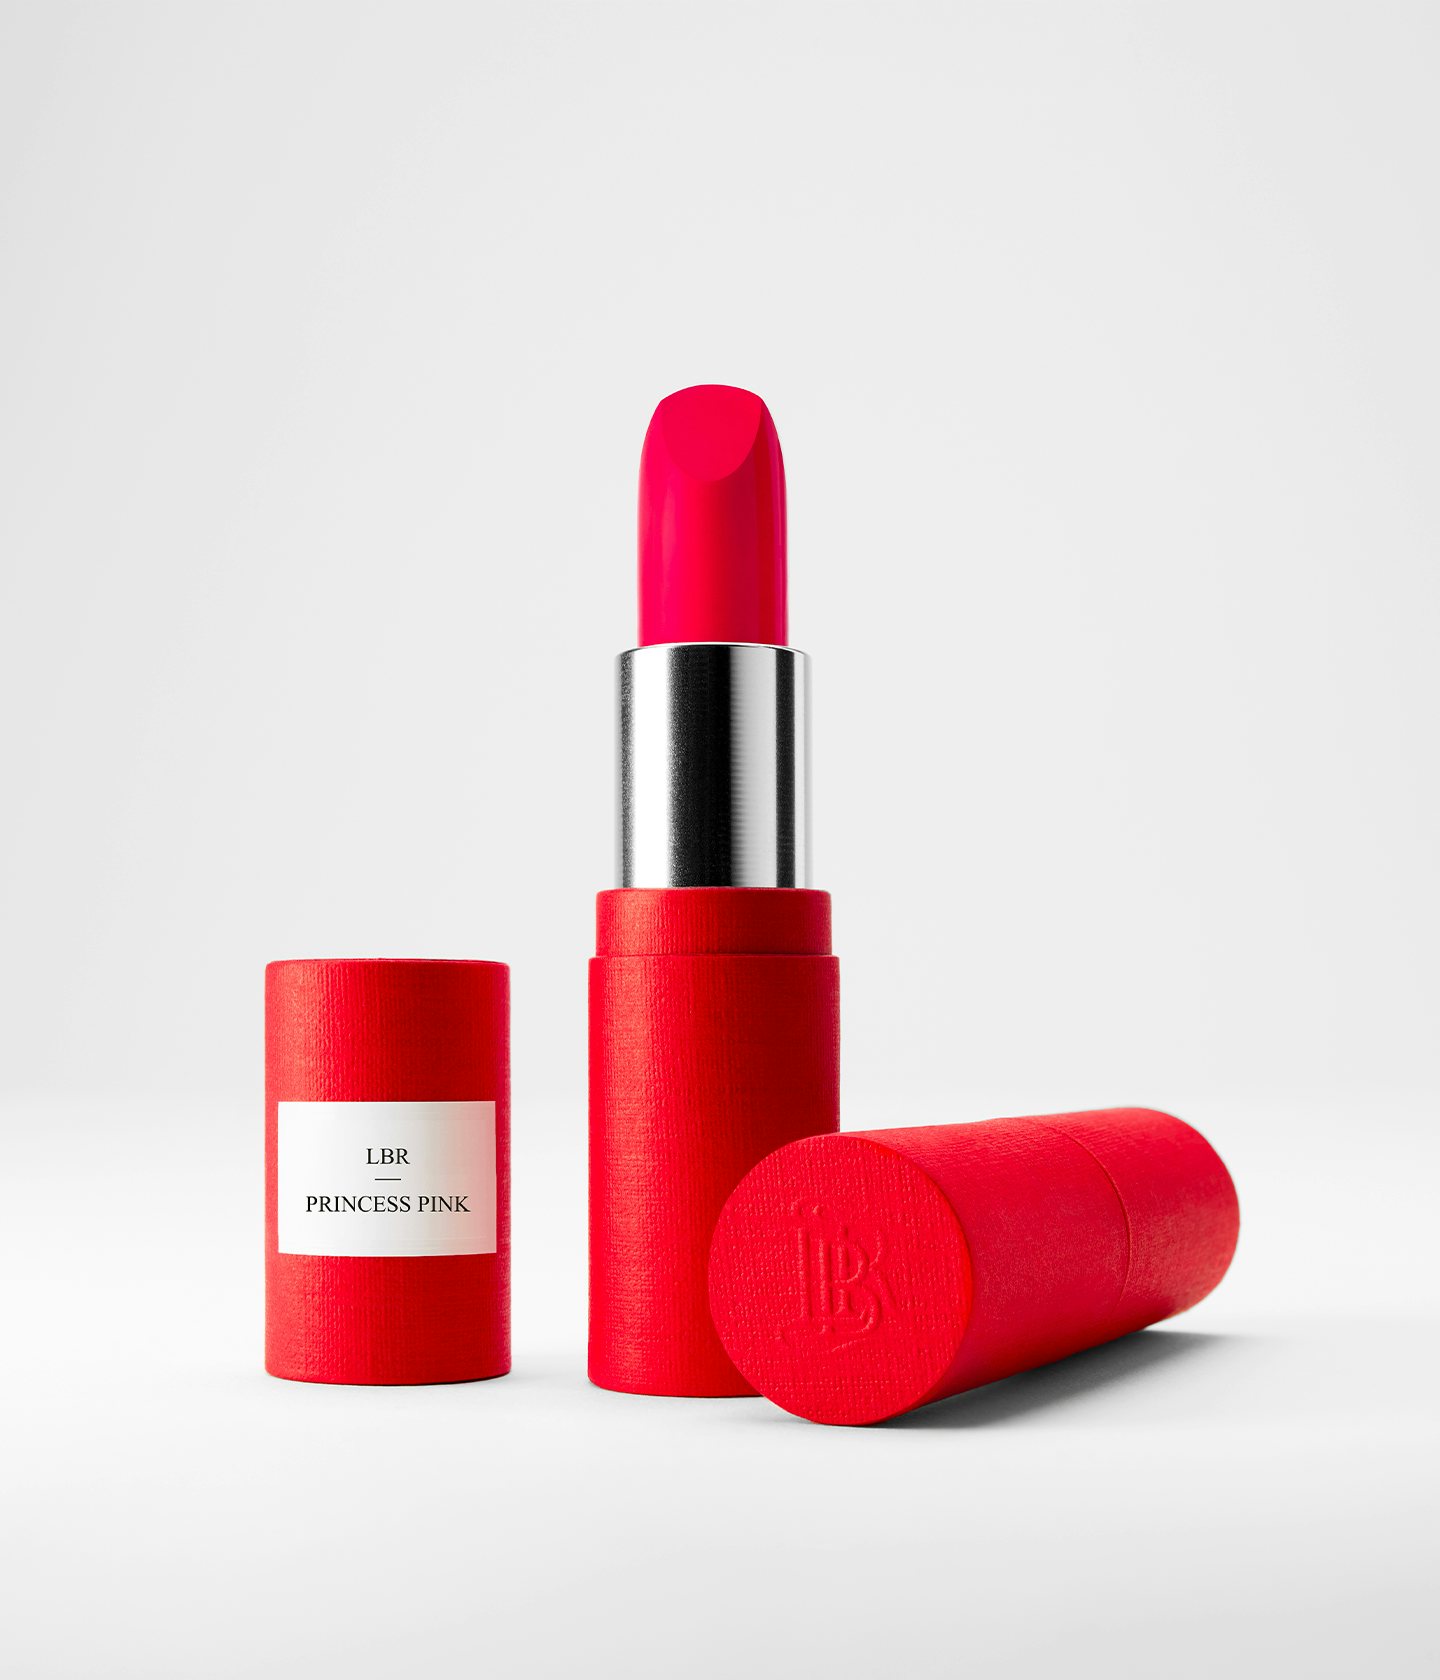 La bouche rouge Princess Pink lipstick in the red paper case